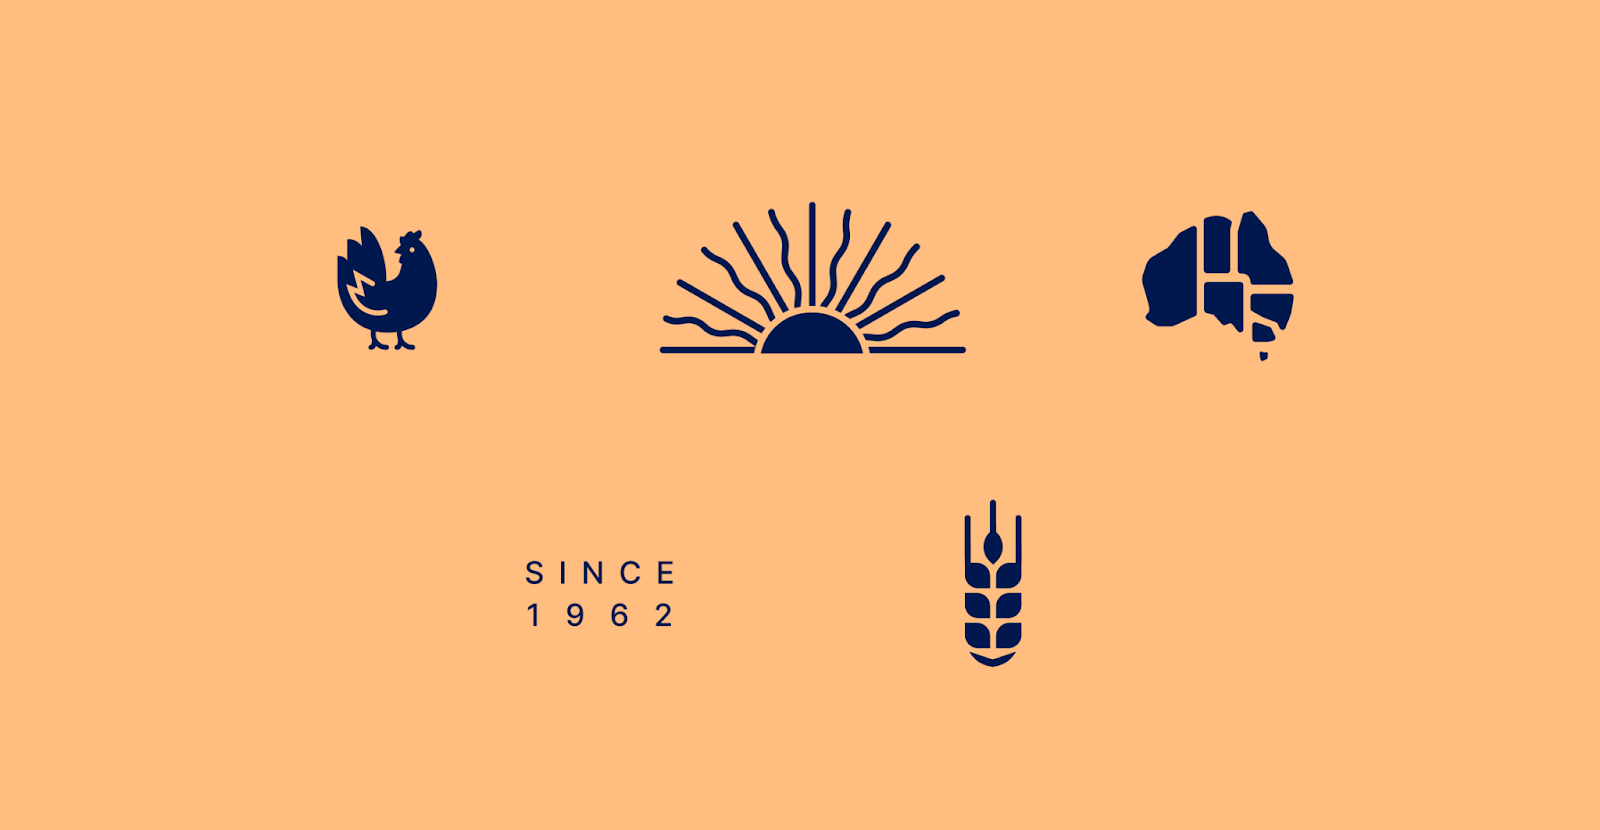 Screenshot of five icons created for this new brand identity. Icons are all in block navy blue and include a chicken, a rising sun, the Australian map, an ear of wheat, and the text 'Sonce 1962'